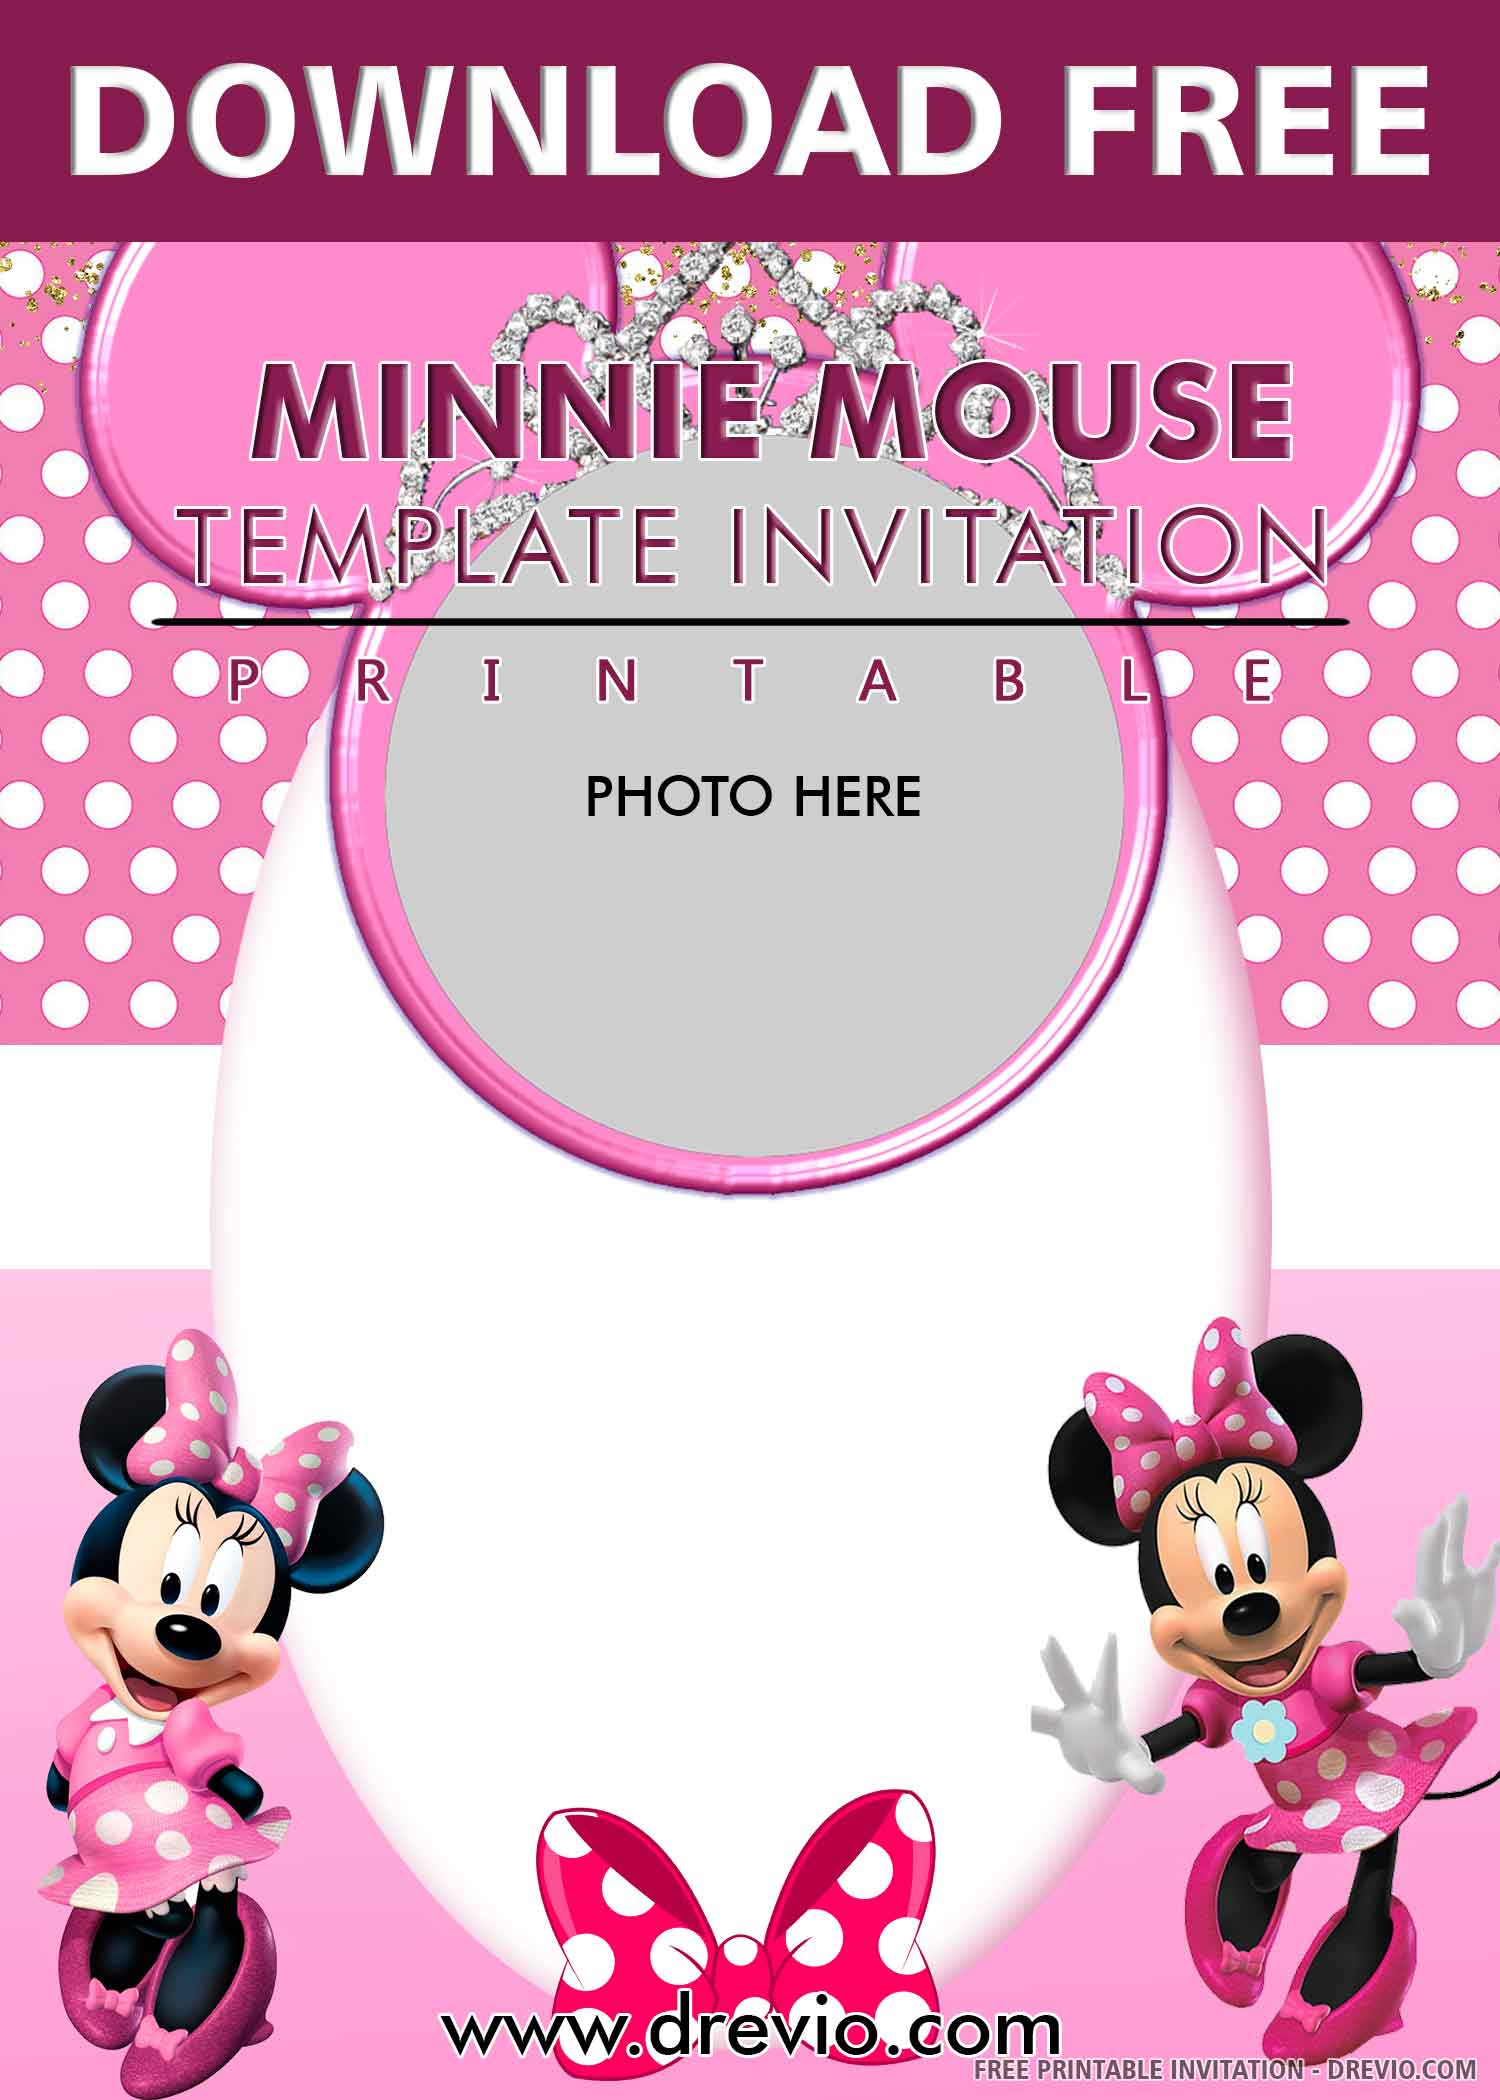 free-printable-pool-party-invitation-templates-download-hundreds-free